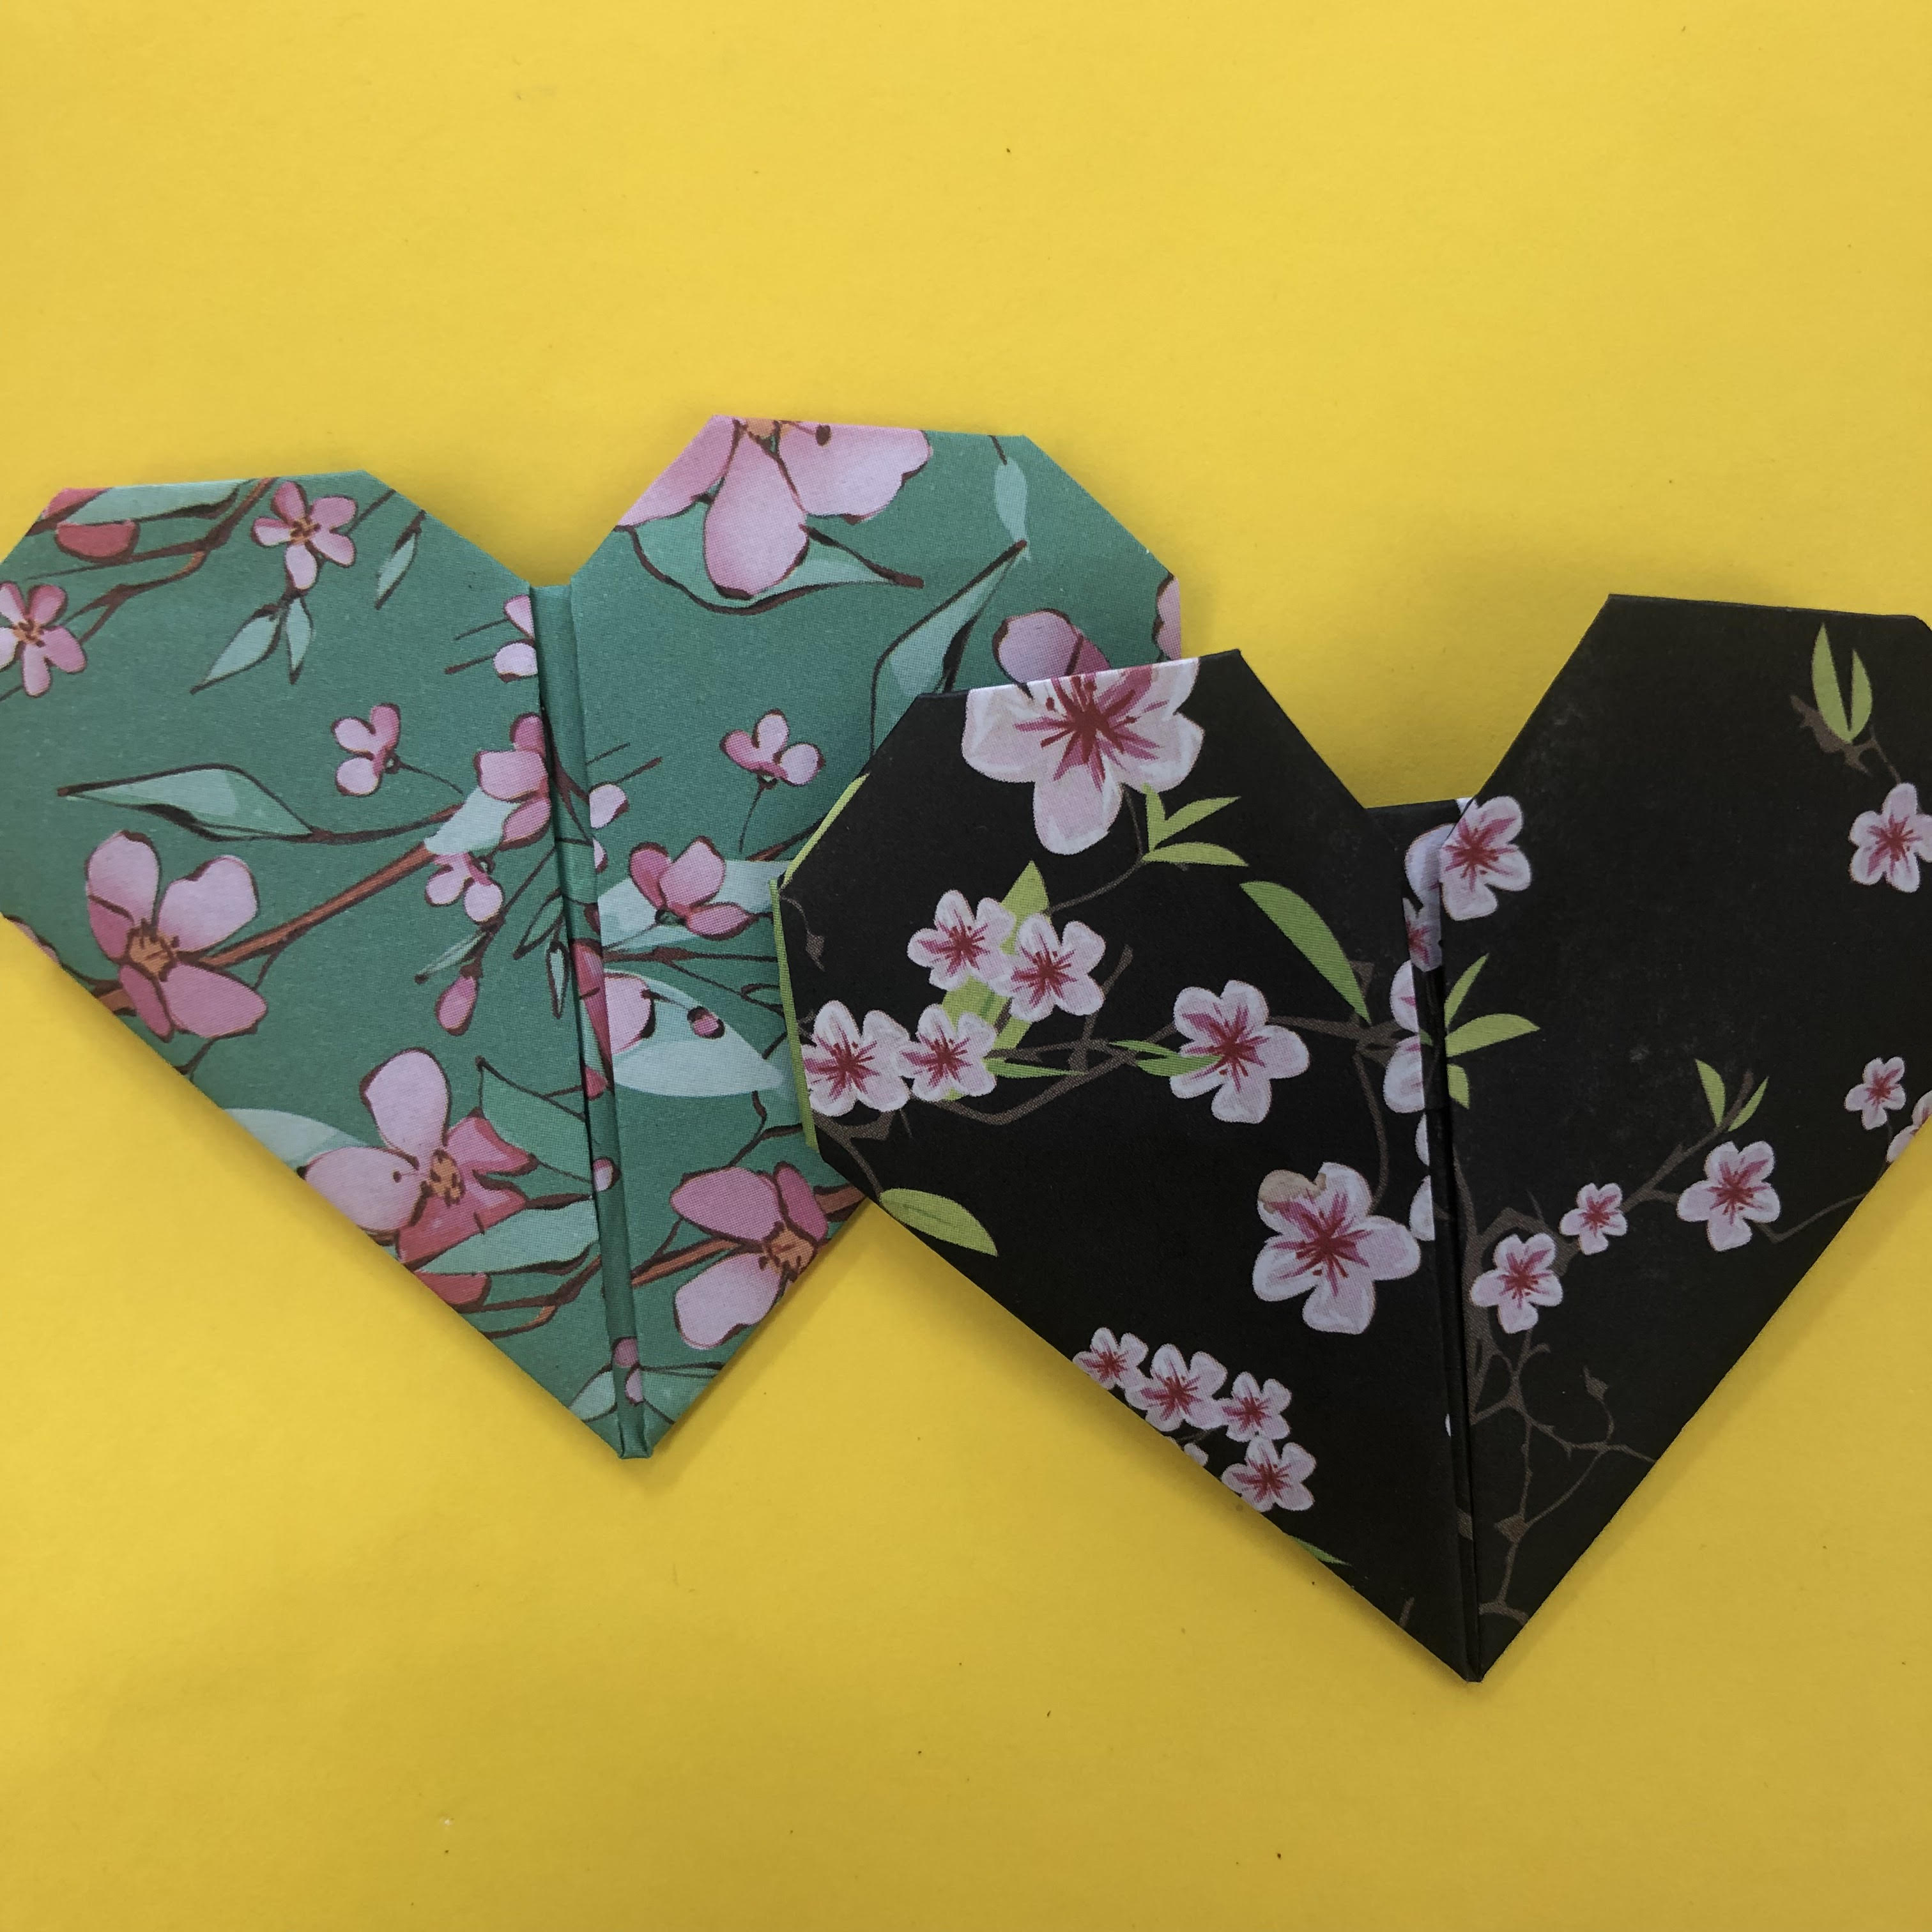 Two origami hearts on a yellow background. One is jade green with pink flowers, and one is black with pink flowers.